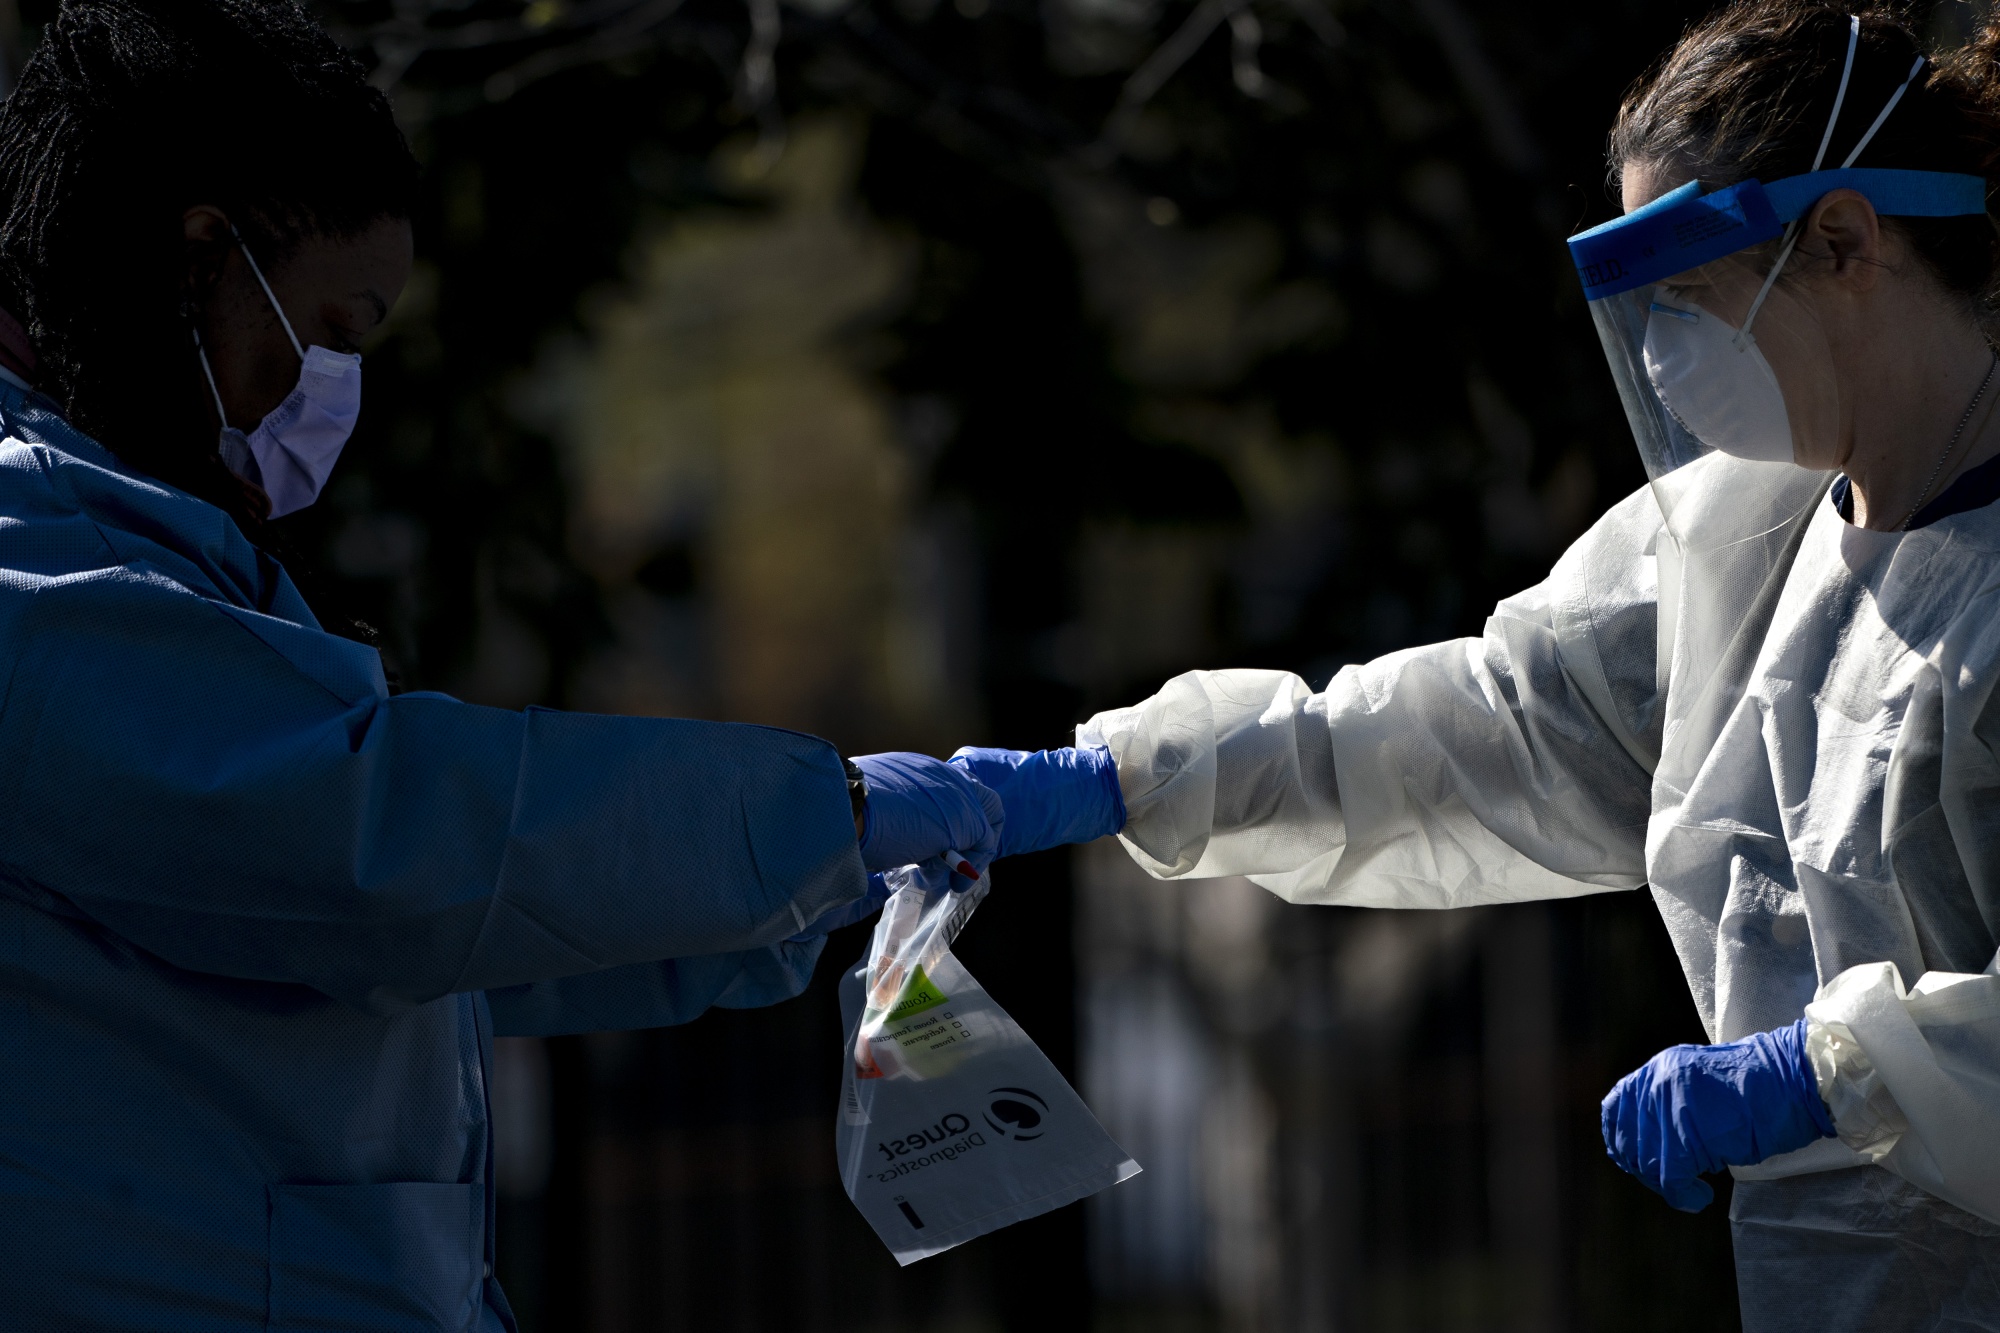 Healthcare workers places a vial into a Quest Diagnostics bag at a drive-thru testing site in Washington, D.C., on April 2.